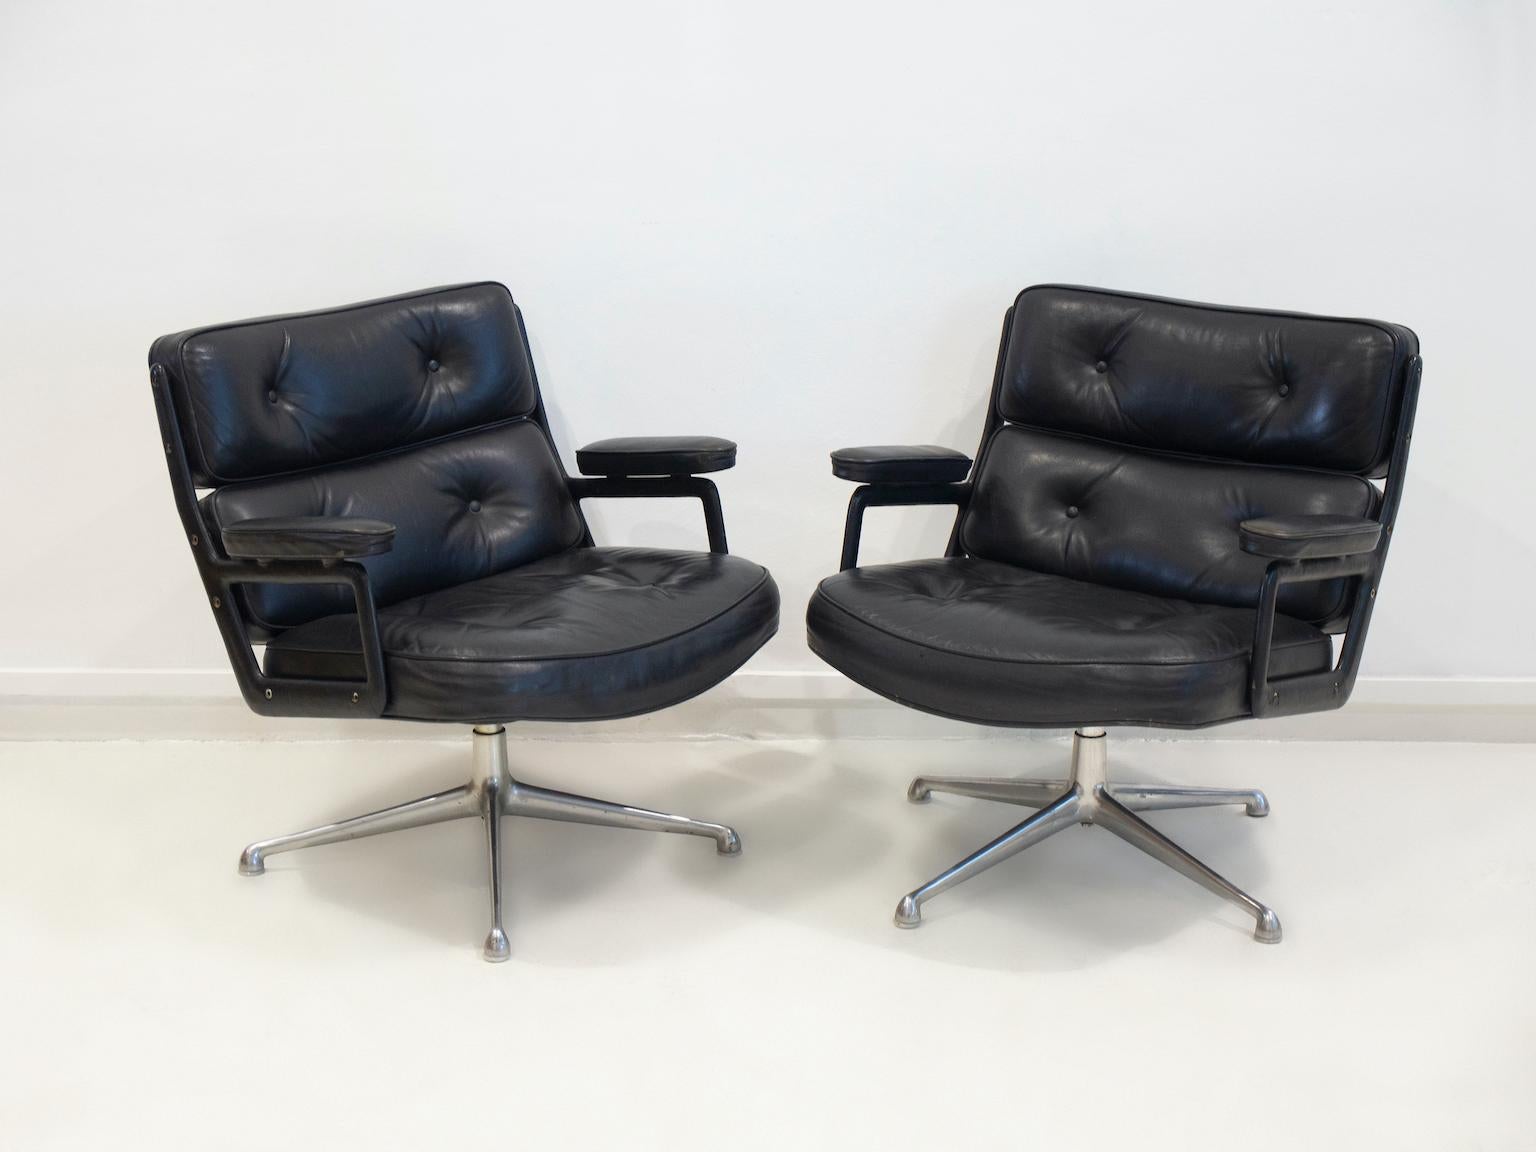 Mid-Century Modern Pair of Black Leather Executive Chairs by Charles and Ray Eames